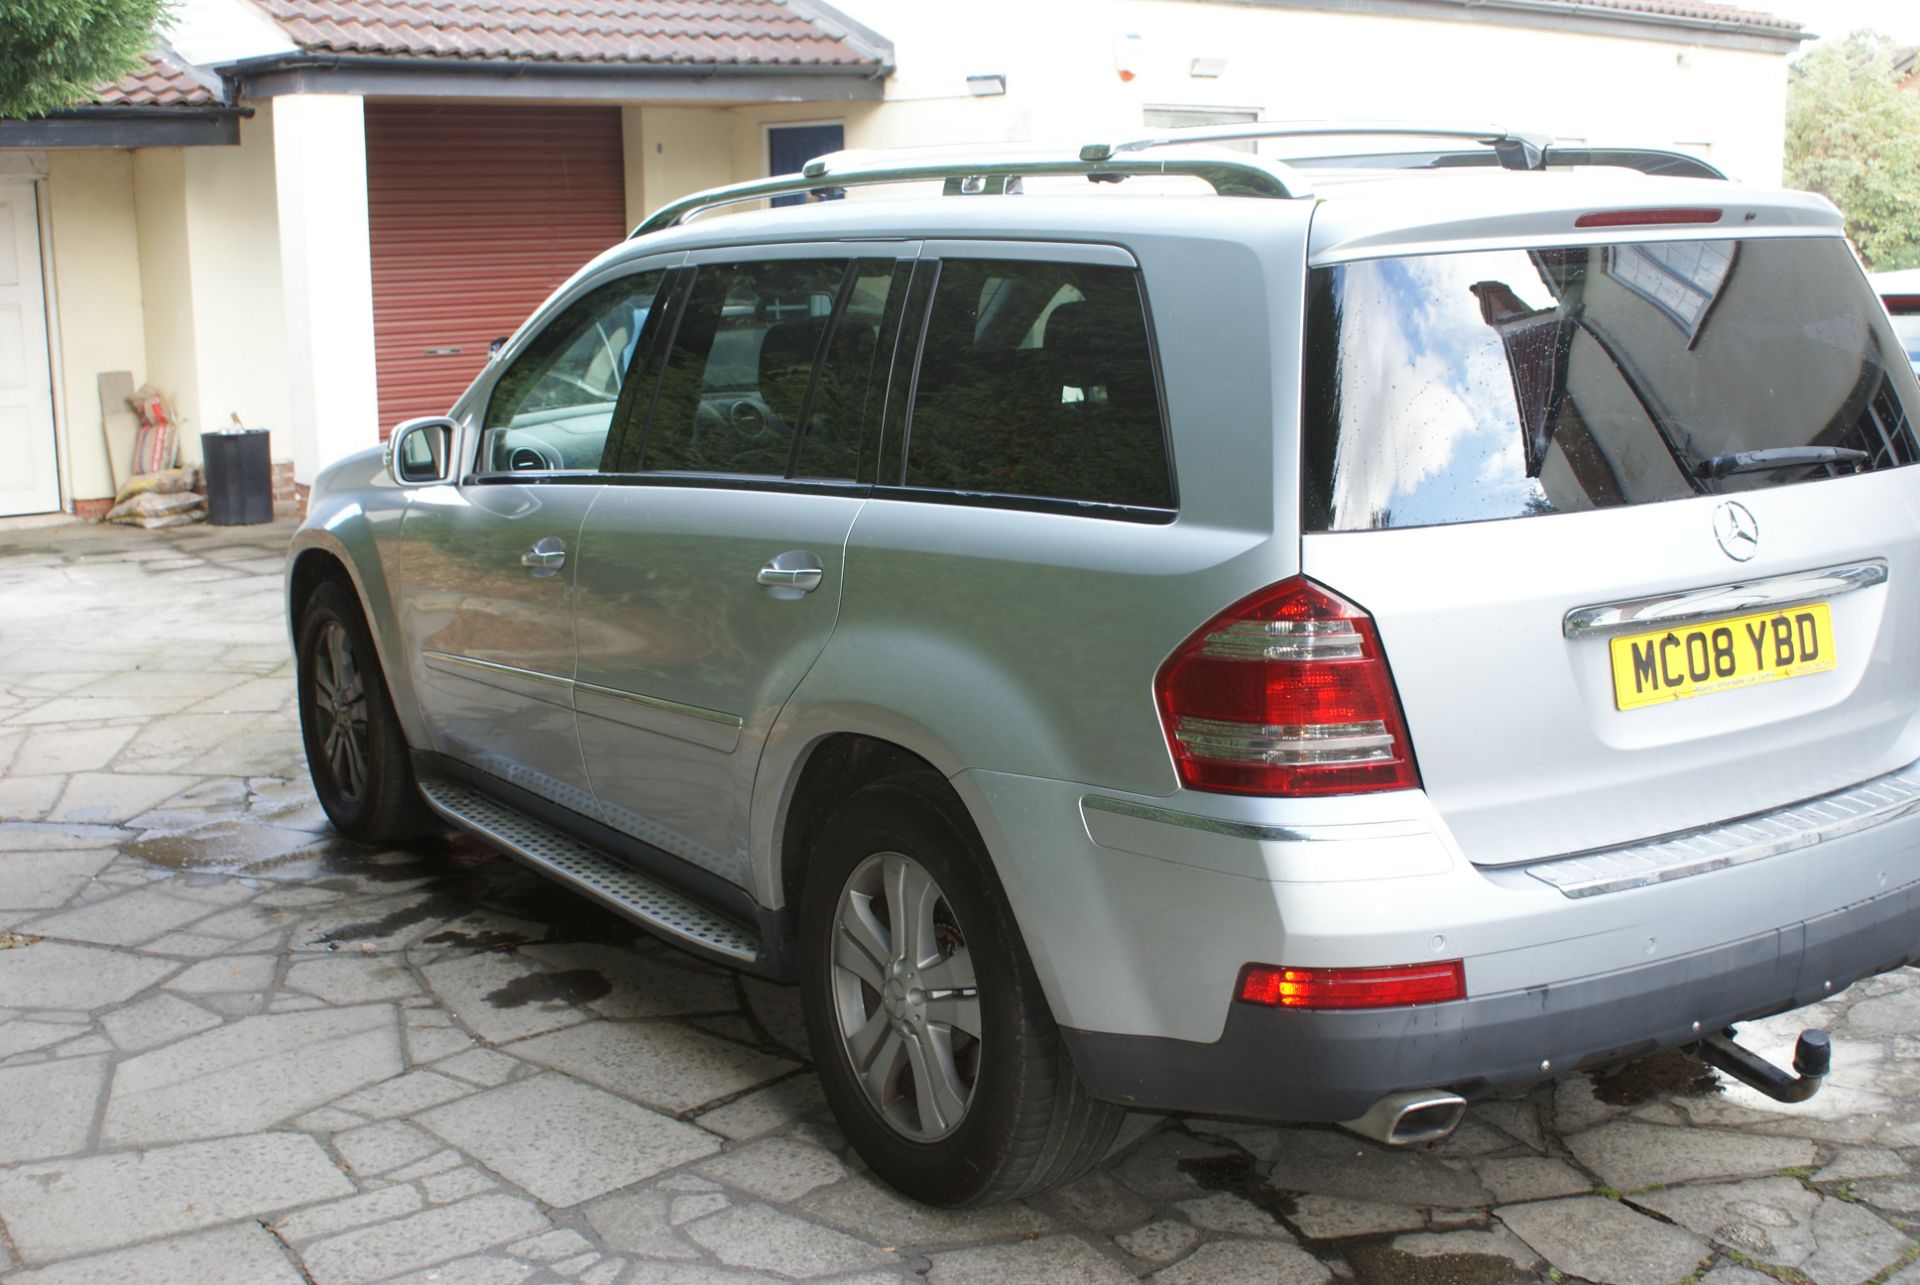 2008 Mercedes Benz GL420 CDI 4-MATIC A (7 SEATER) - Image 2 of 3